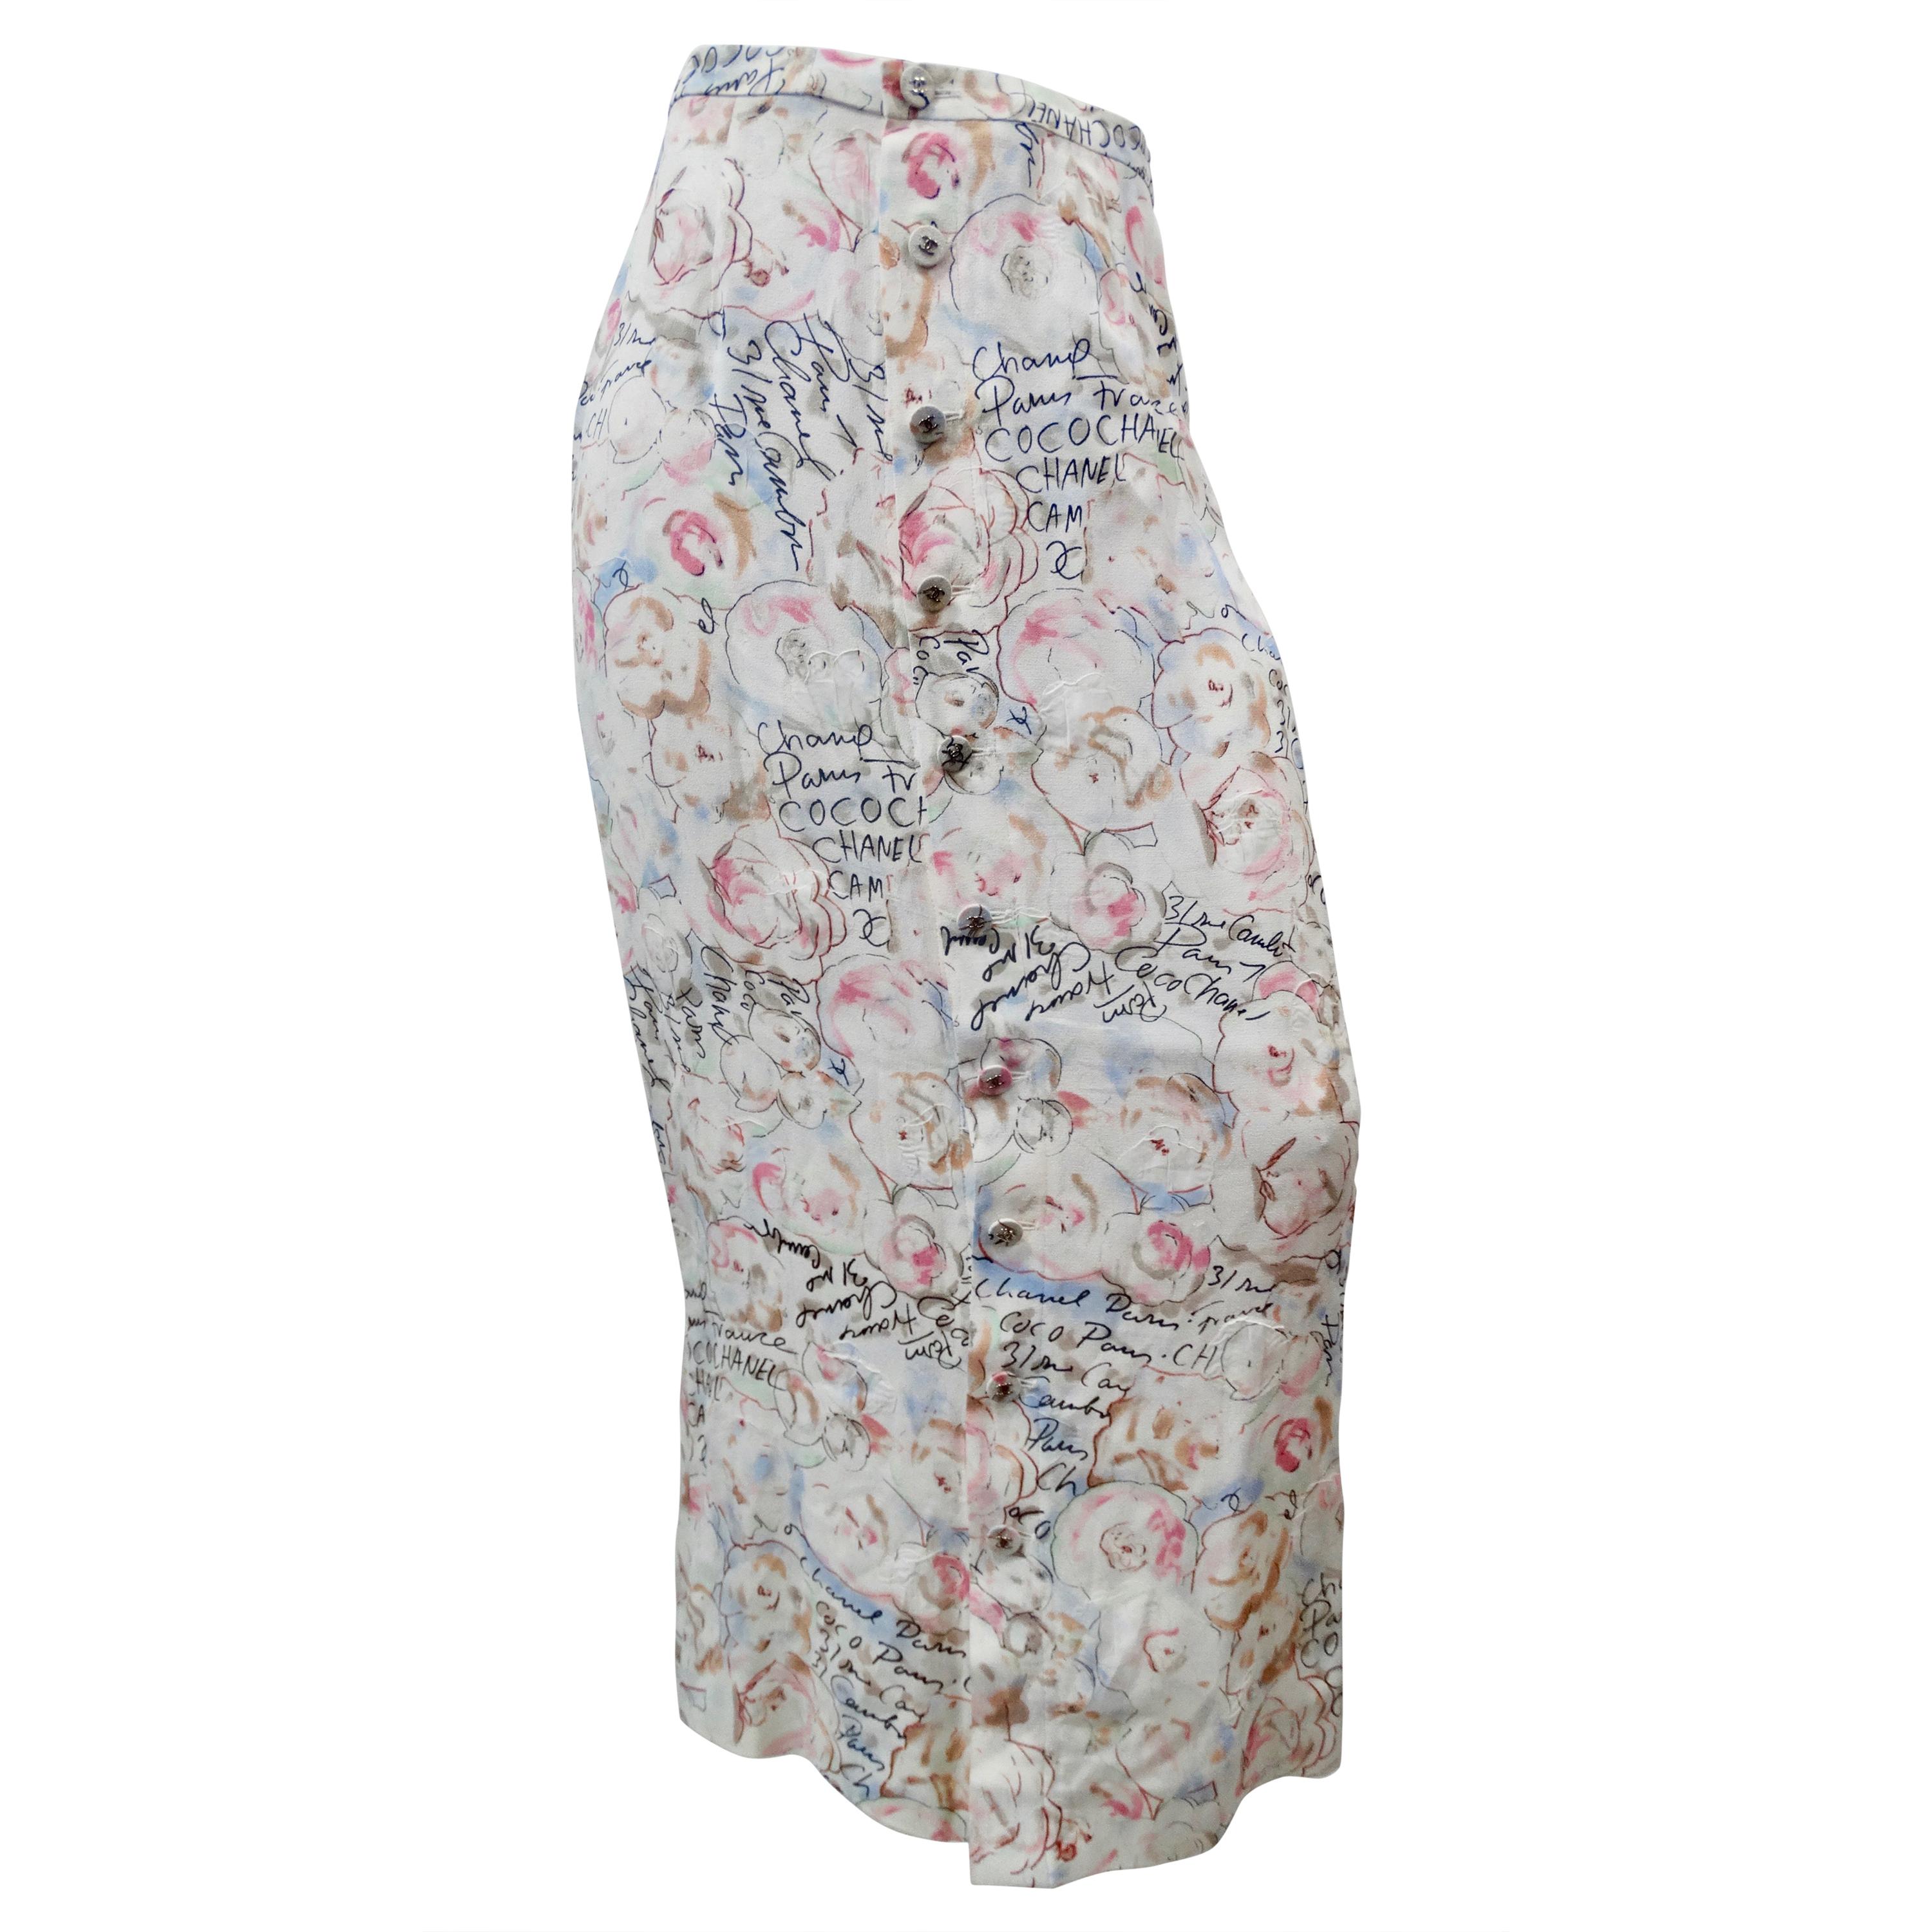 Chanel 1998 Cruise Camellia Flower Novelty Print Button Up Maxi Skirt